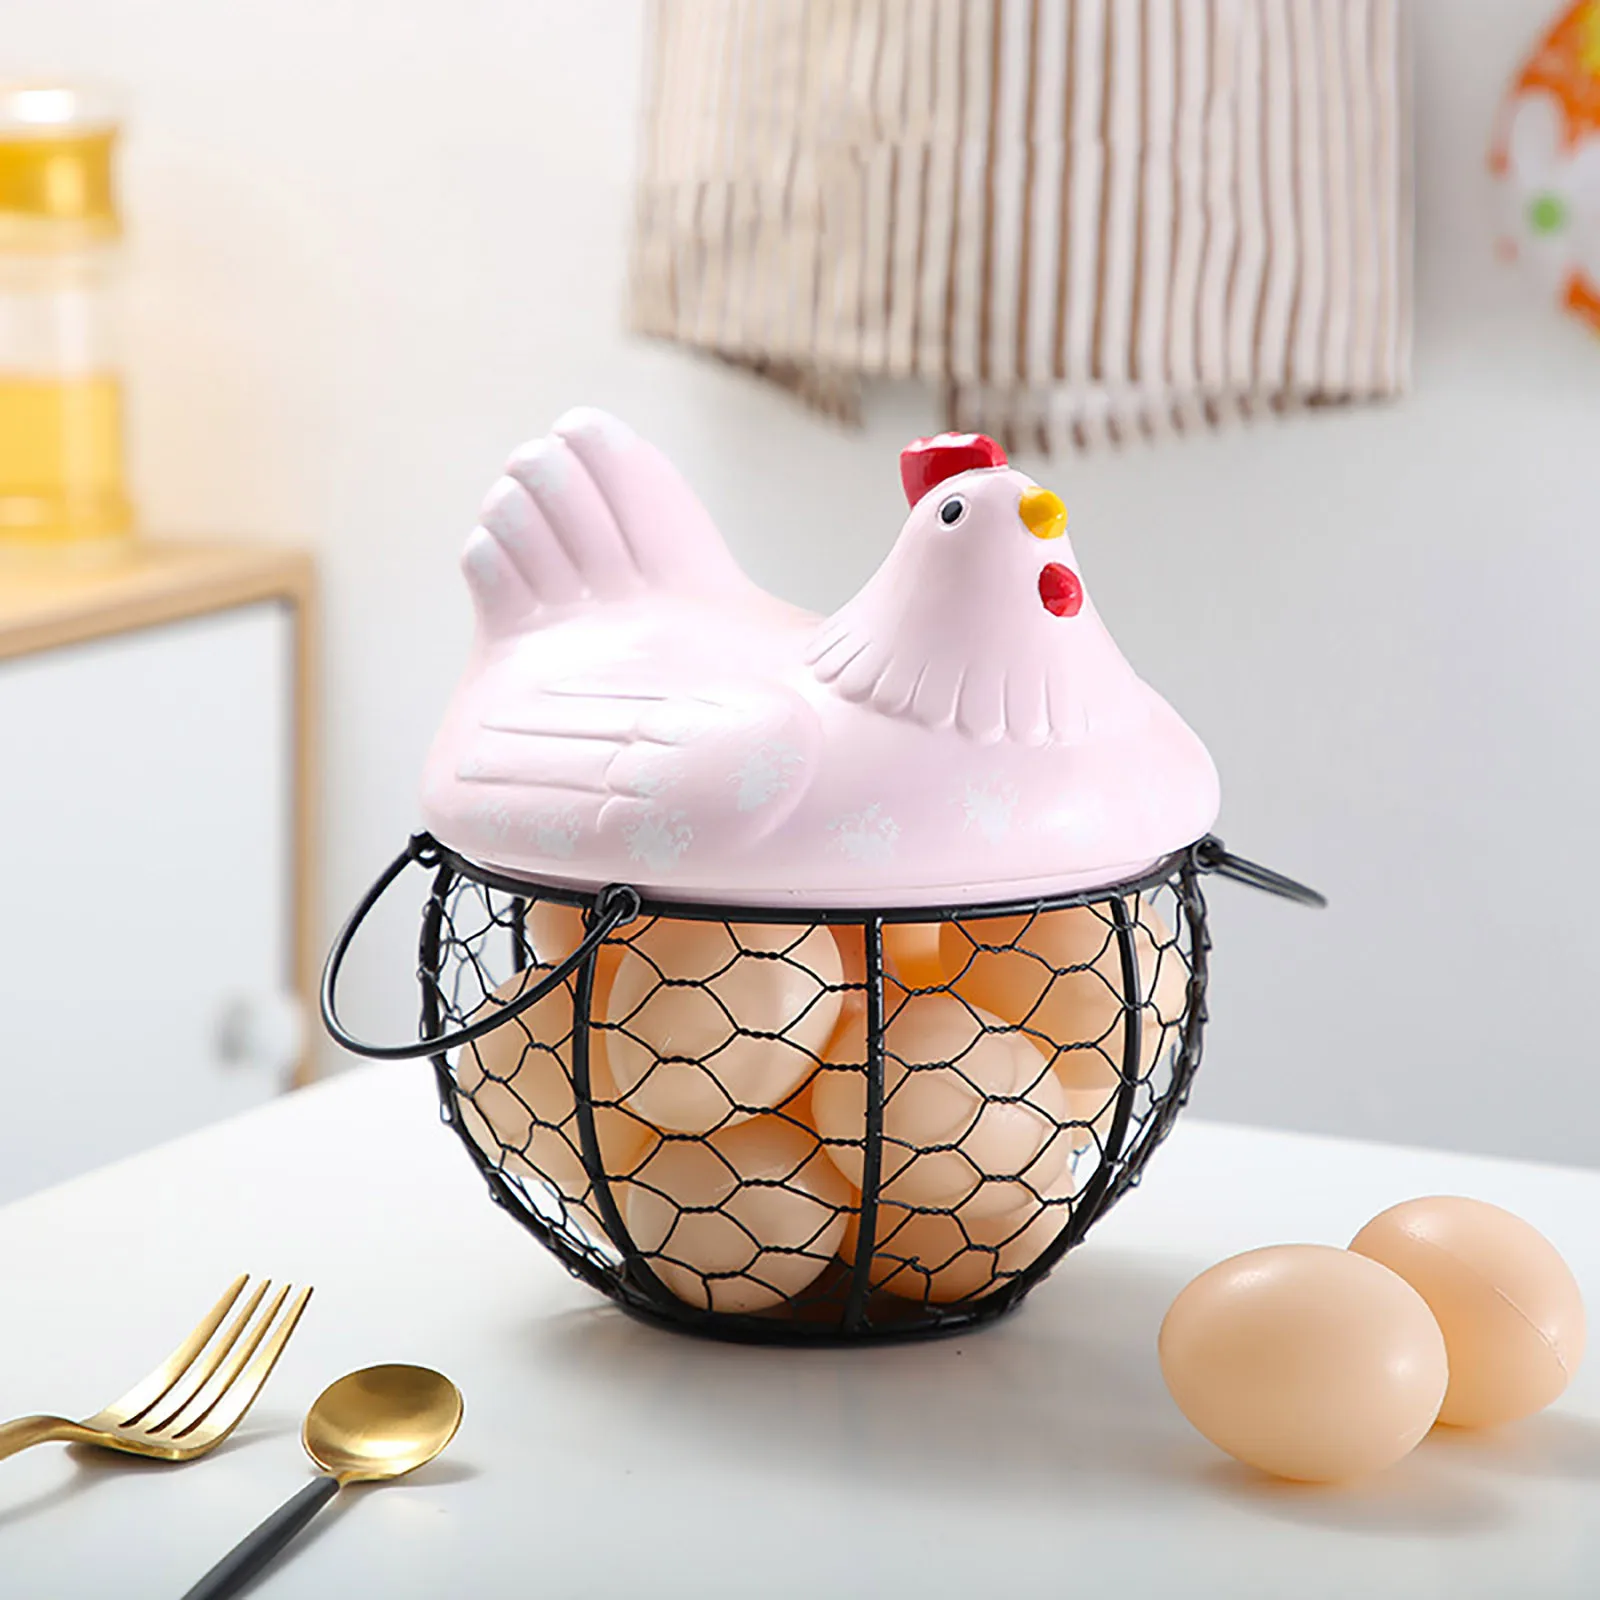 

Simple Iron Ceramic Egg Storage Basket Snack Fruit Container Creative Collection Hen Ornament Kitchen Supplies Home Decoration